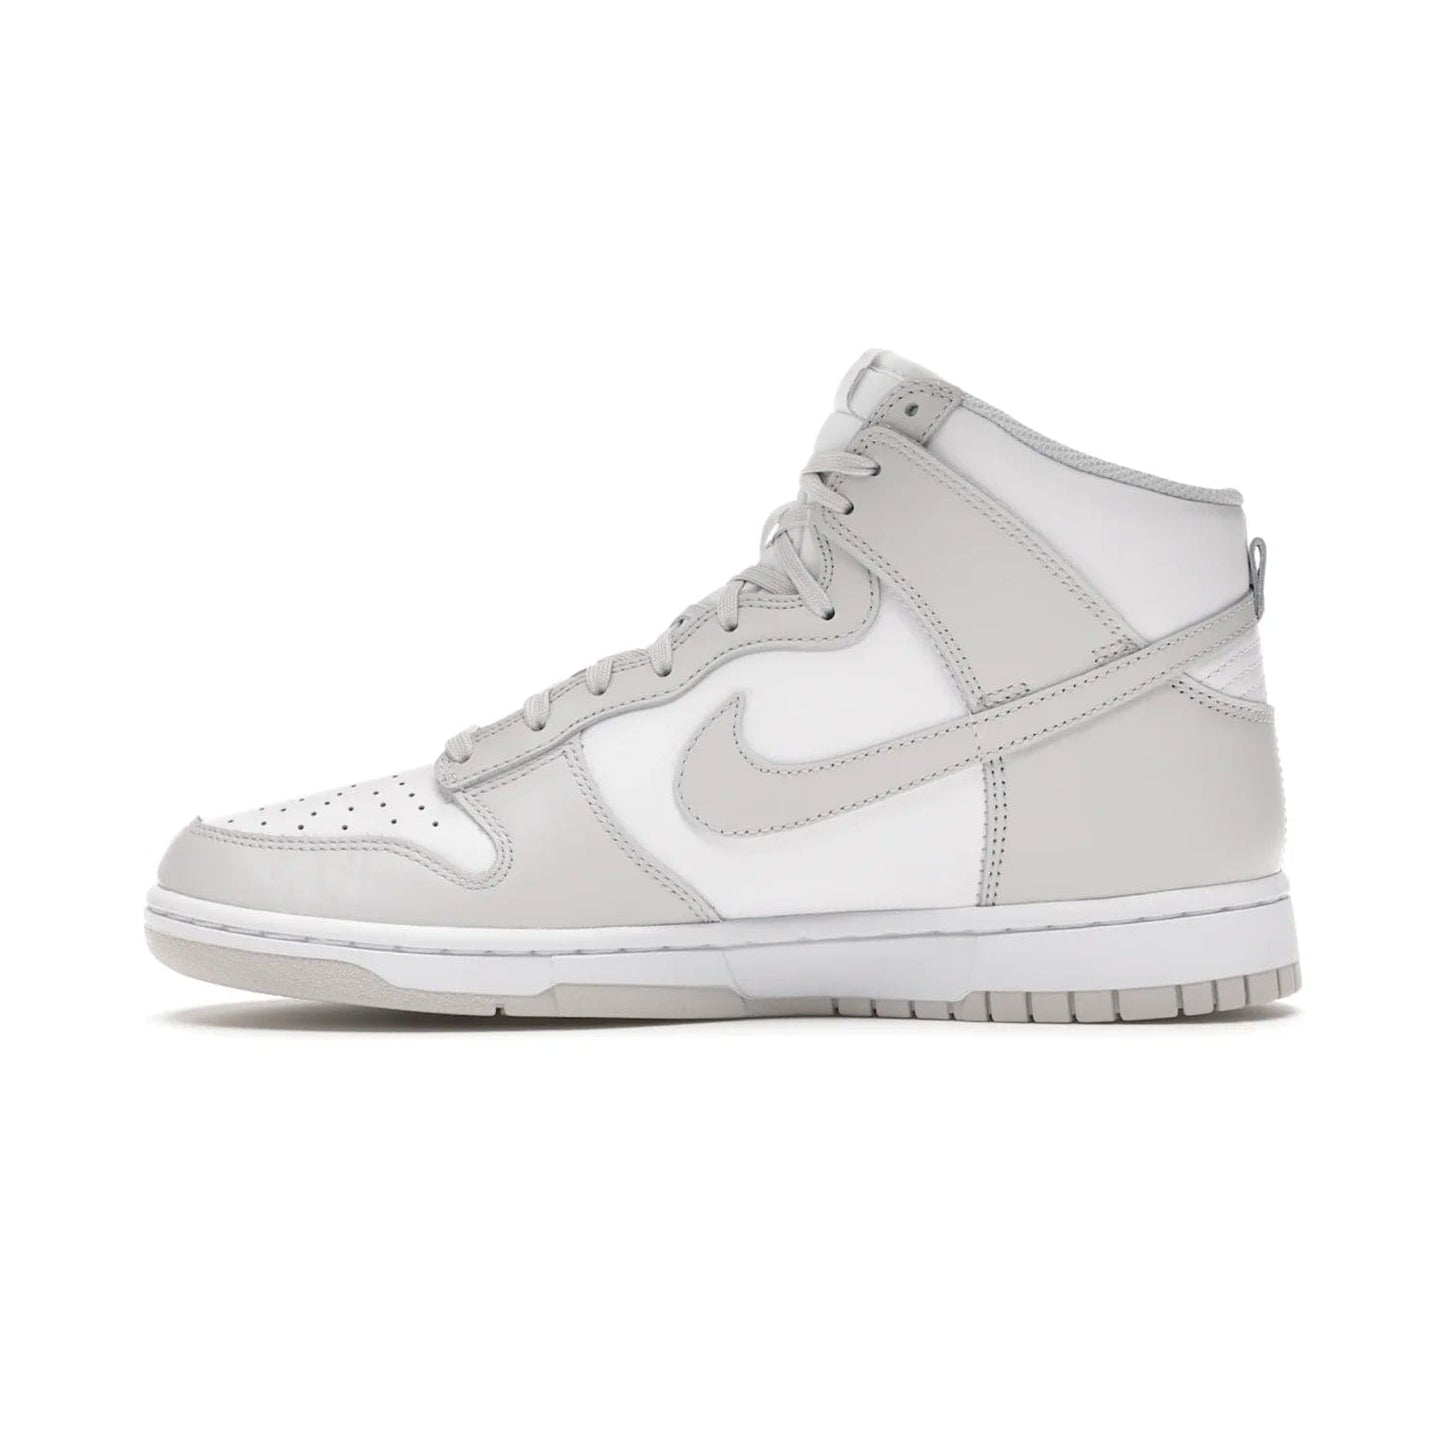 Nike Dunk High Retro White Vast Grey (2021) - Image 19 - Only at www.BallersClubKickz.com - Nike Dunk High Retro White Vast Grey 2021: classic '80s basketball sneaker with a crisp white base, grey overlays, midsole tooling and outsole. Dropped Feb. 2021.